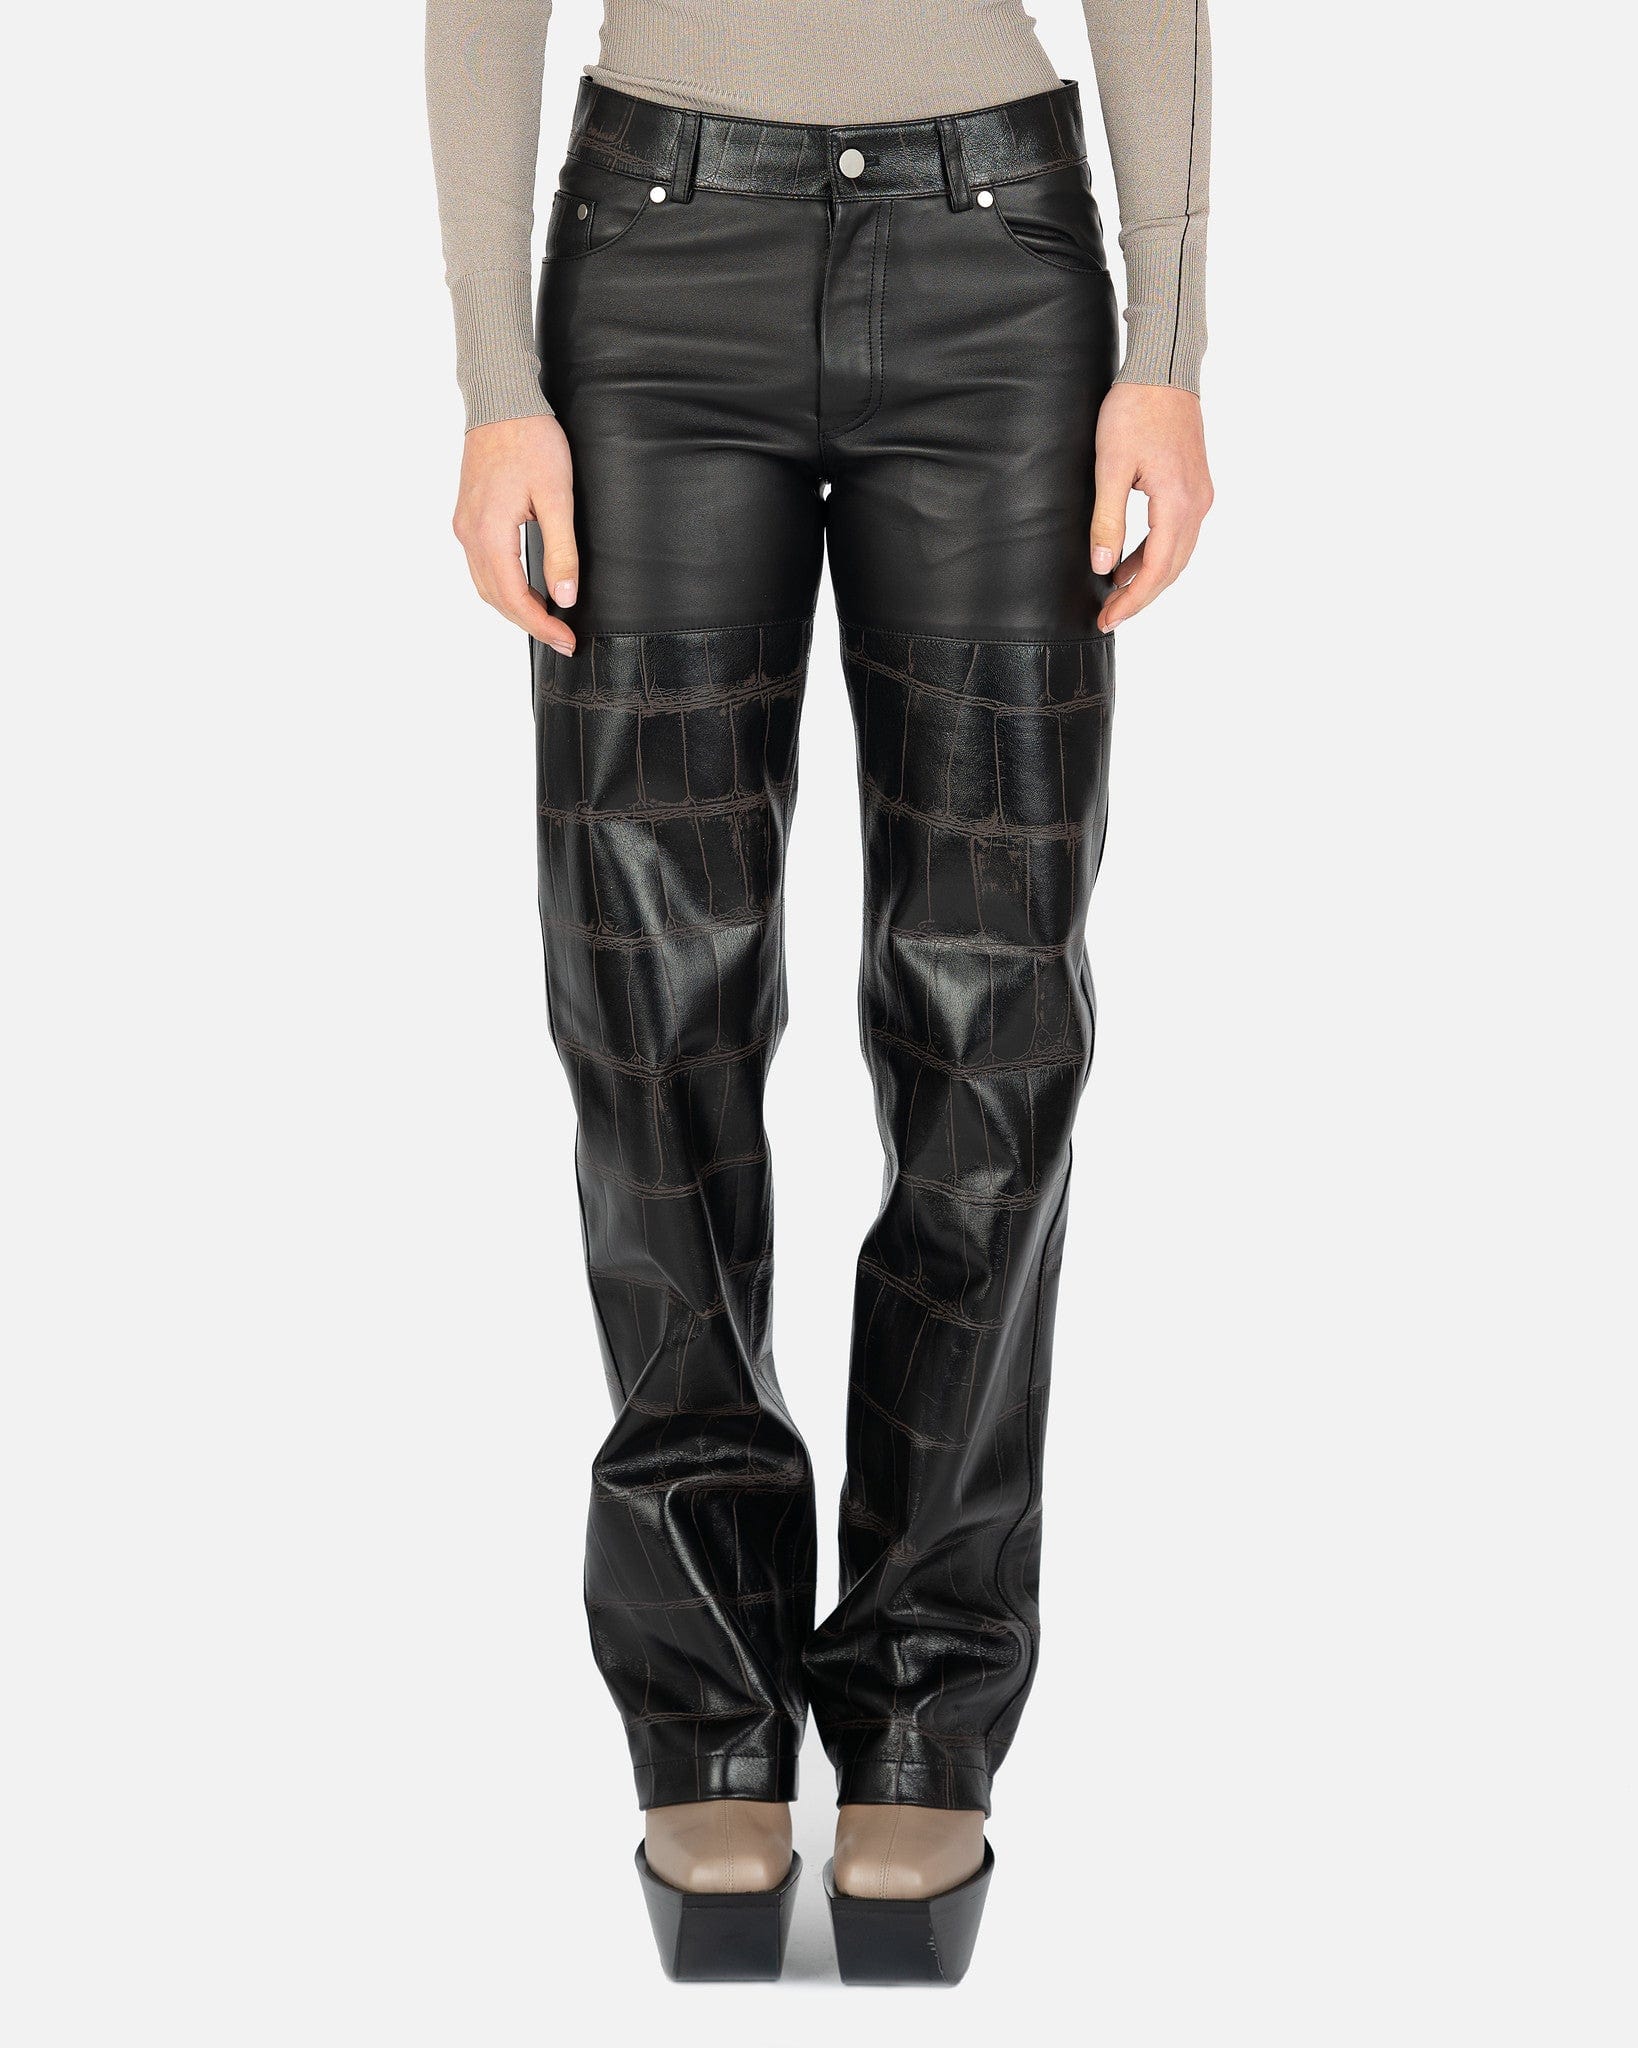 Combo Leather Pant in Black/Brown